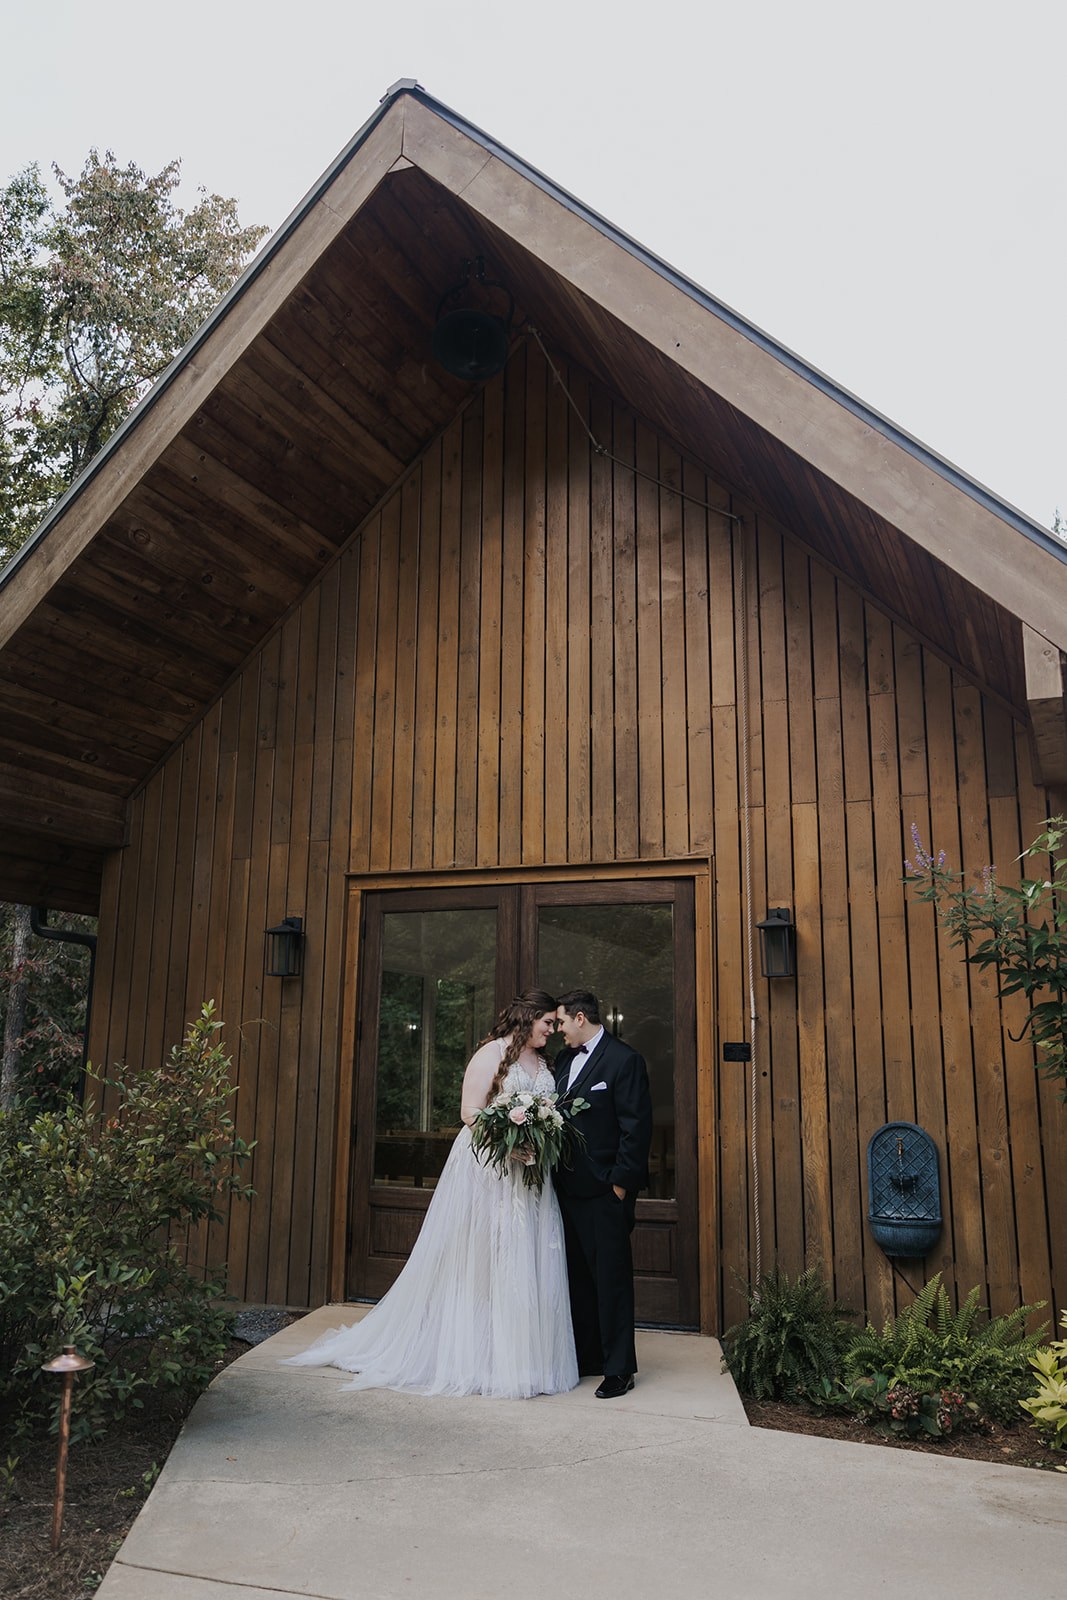 Bride and groom share a moment outside their picturesque Georgia wedding venue!